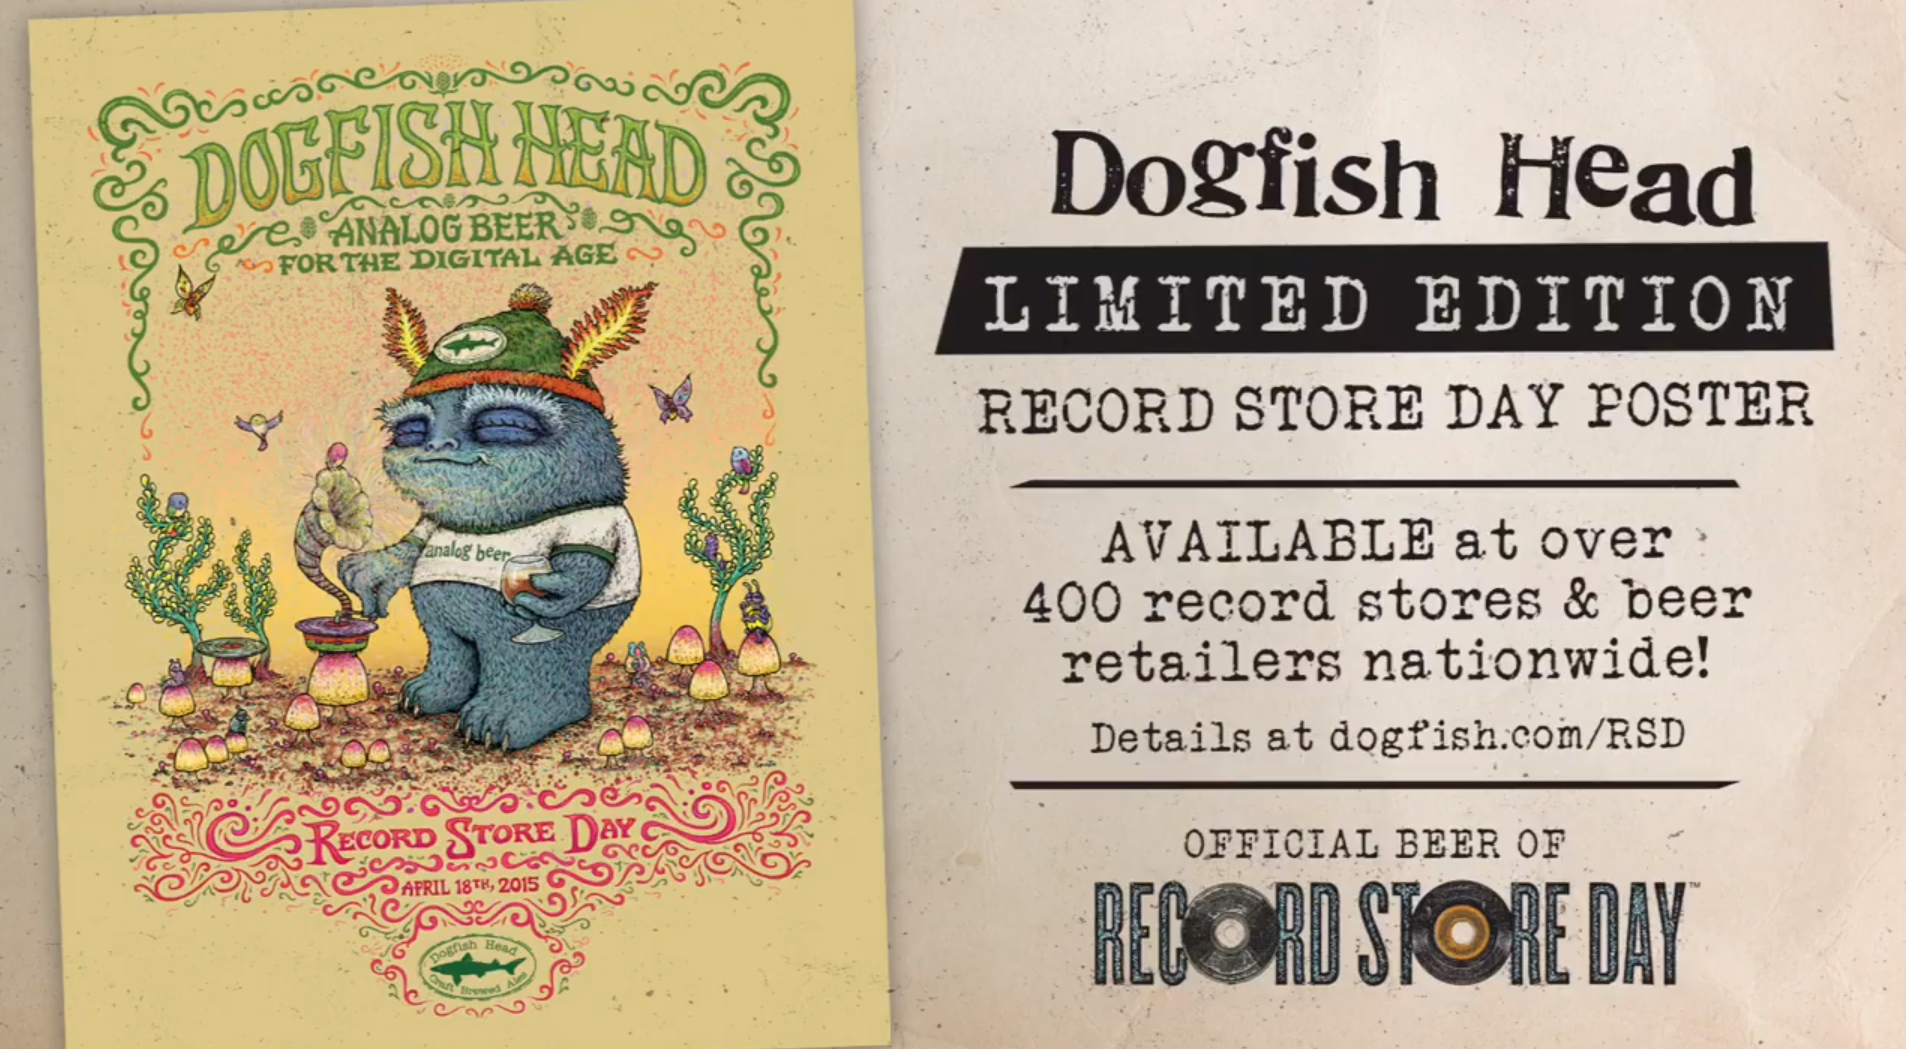 MARQ SPUSTA Dogfish Head Analog Beer Record Store Day STICKER Art from poster 